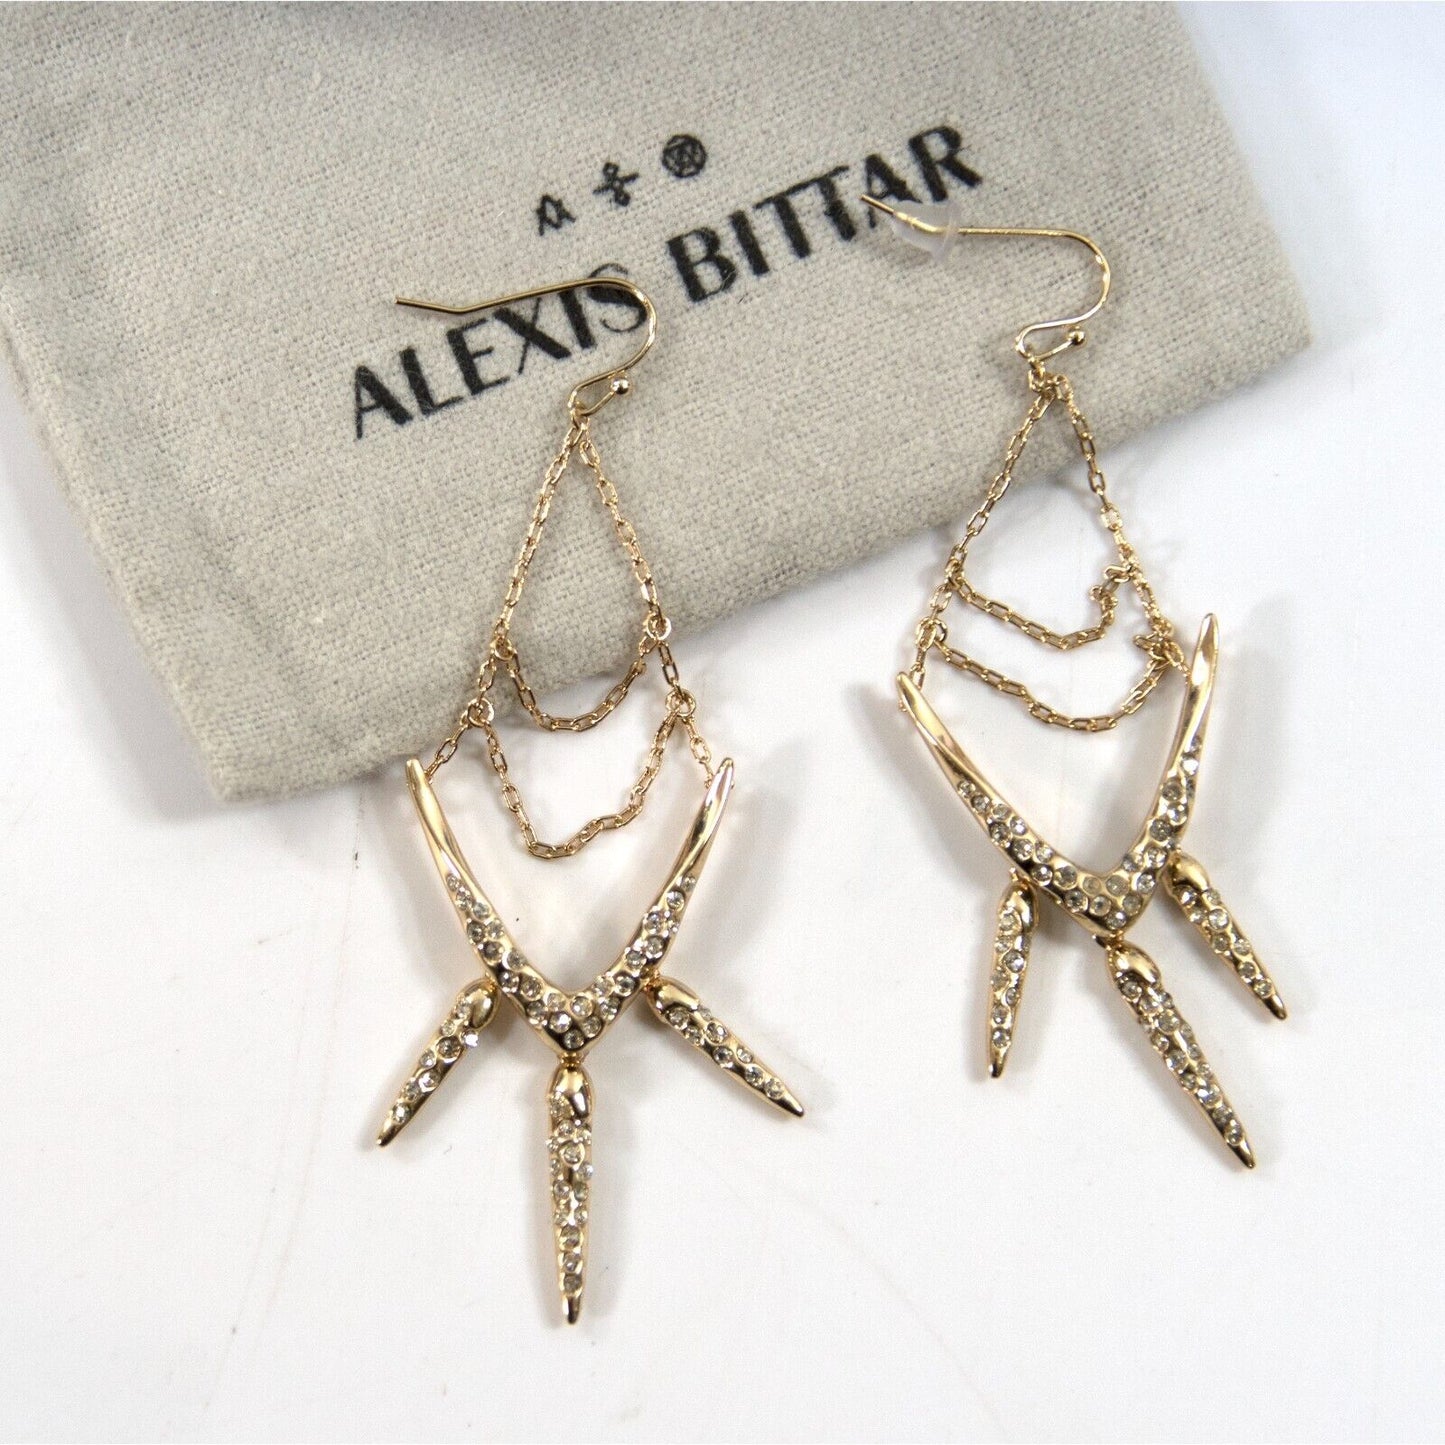 Alexis Bittar Gold Crystal Navette Chain Fringe Large Drop Earrings NWT